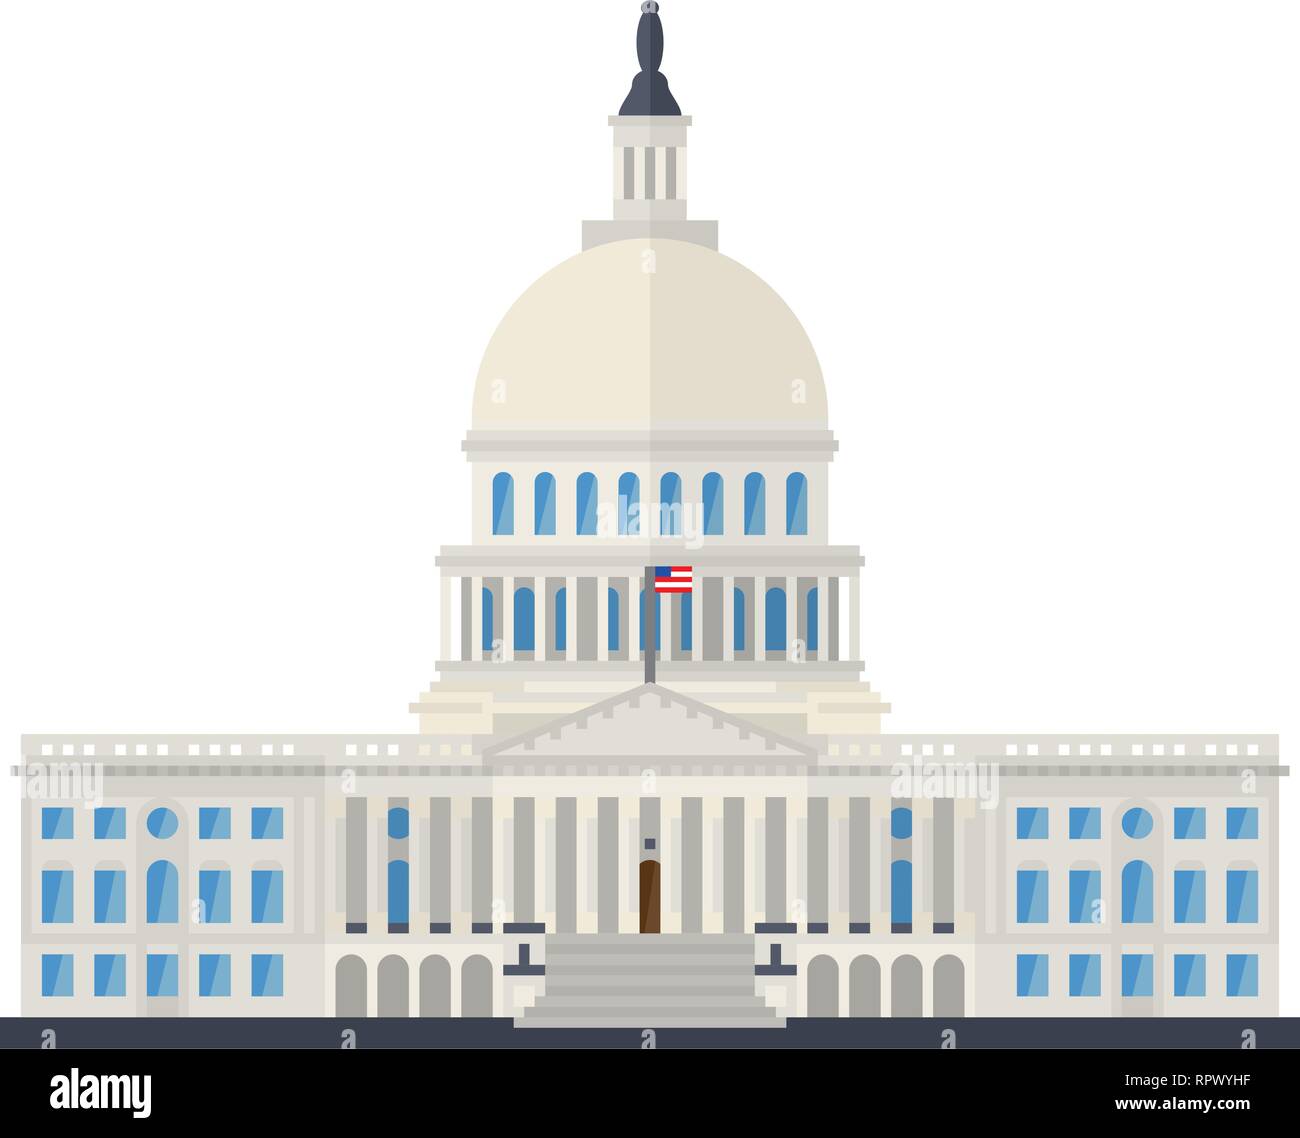 The Capitol building at Washington, D.C., USA, flat design isolated vector illustration Stock Vector